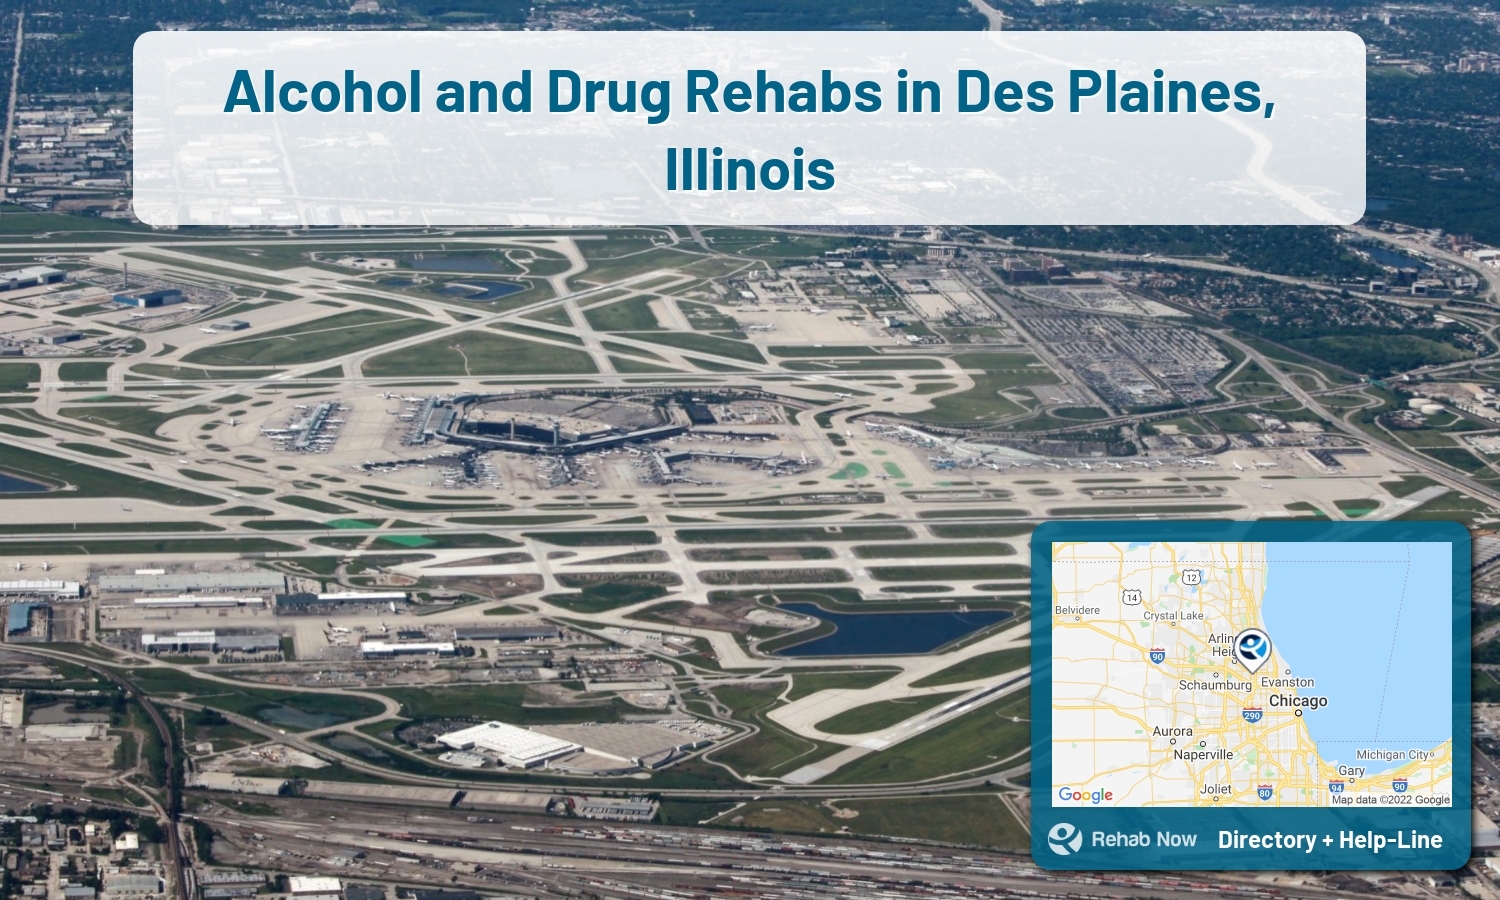 Ready to pick a rehab center in Des Plaines? Get off alcohol, opiates, and other drugs, by selecting top drug rehab centers in Illinois